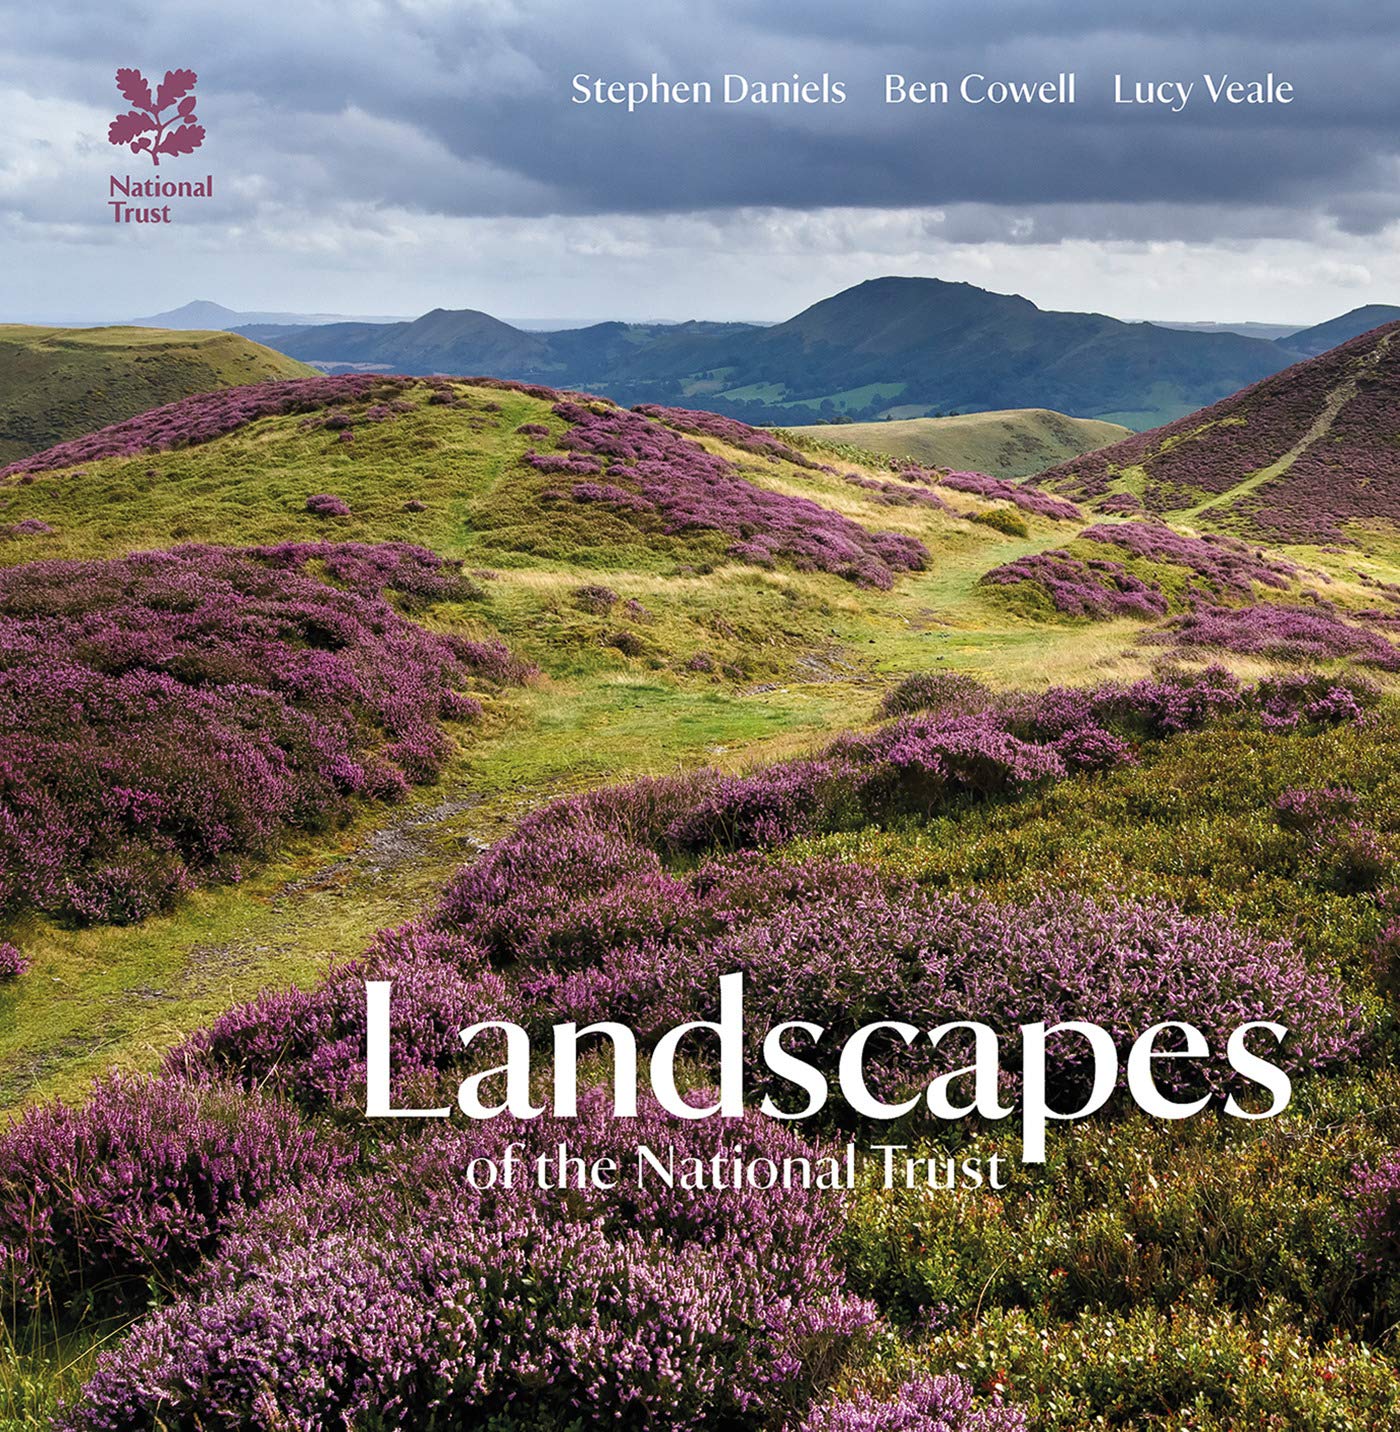 Landscapes of the National Trust | Stephen Daniels, Ben Cowell, Lucy Veale